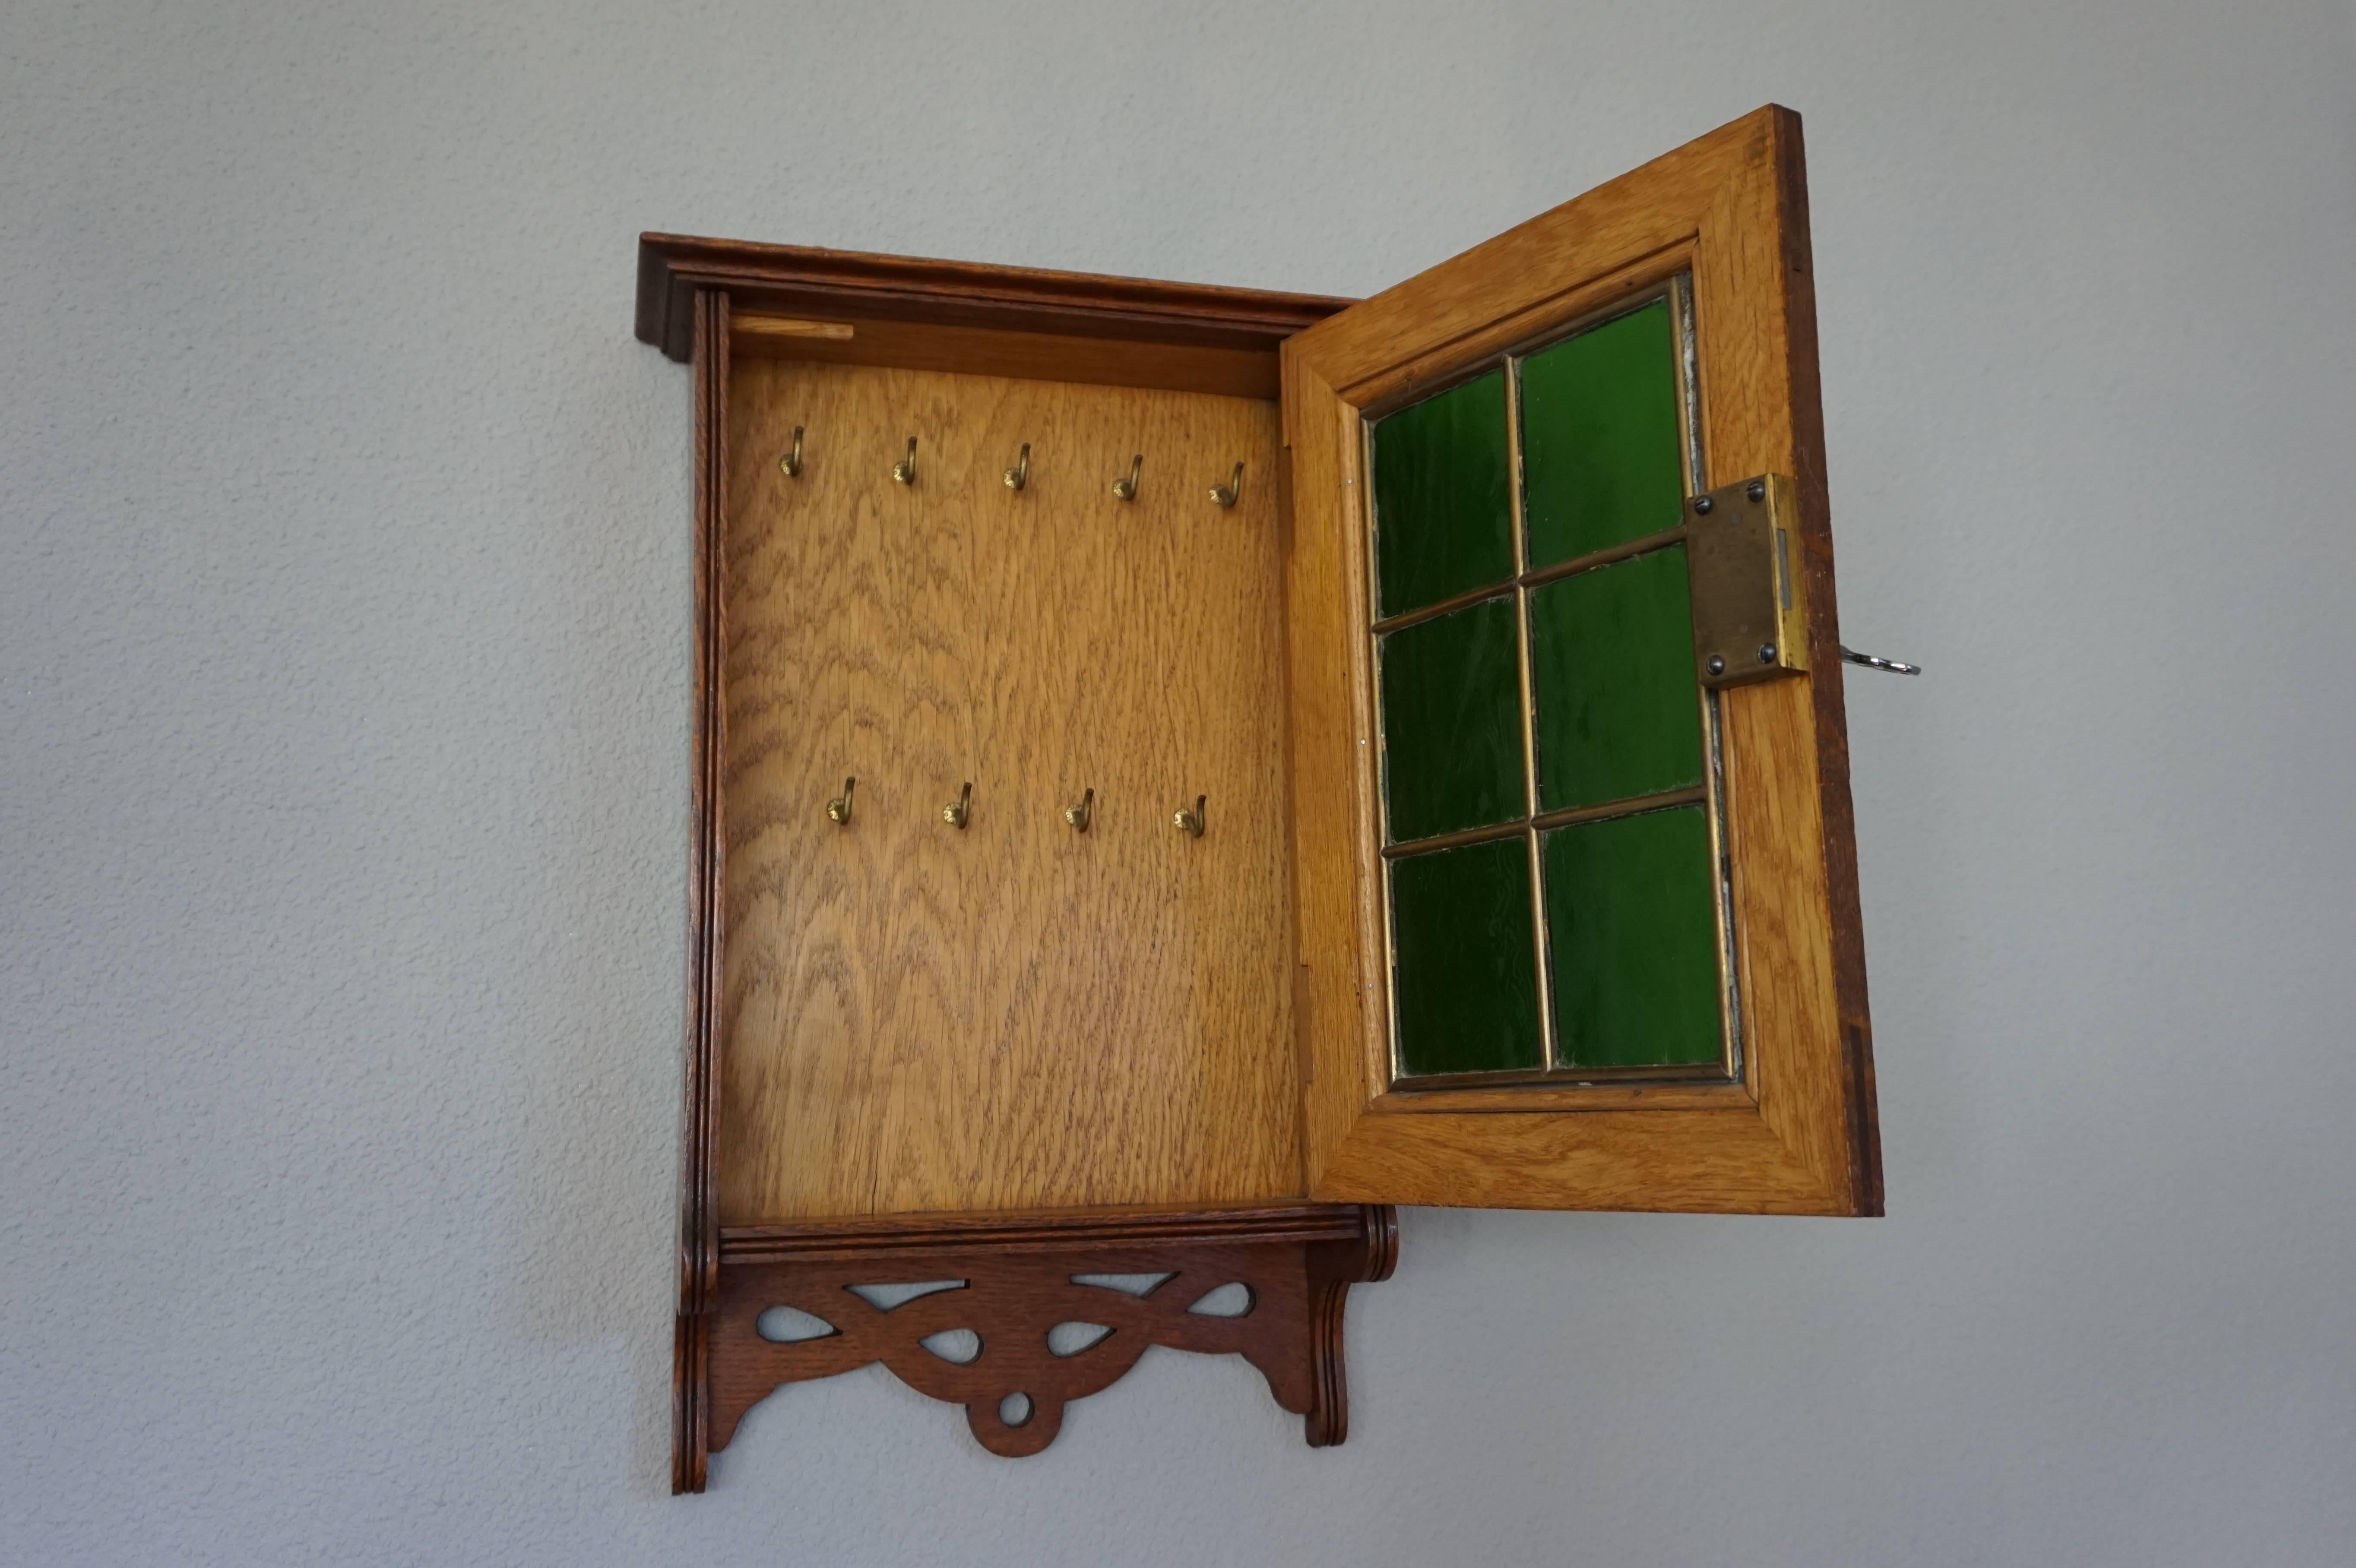 19th Century Stunning Little Arts and Crafts Wall Cabinet for Keys with Brass and Green Glass